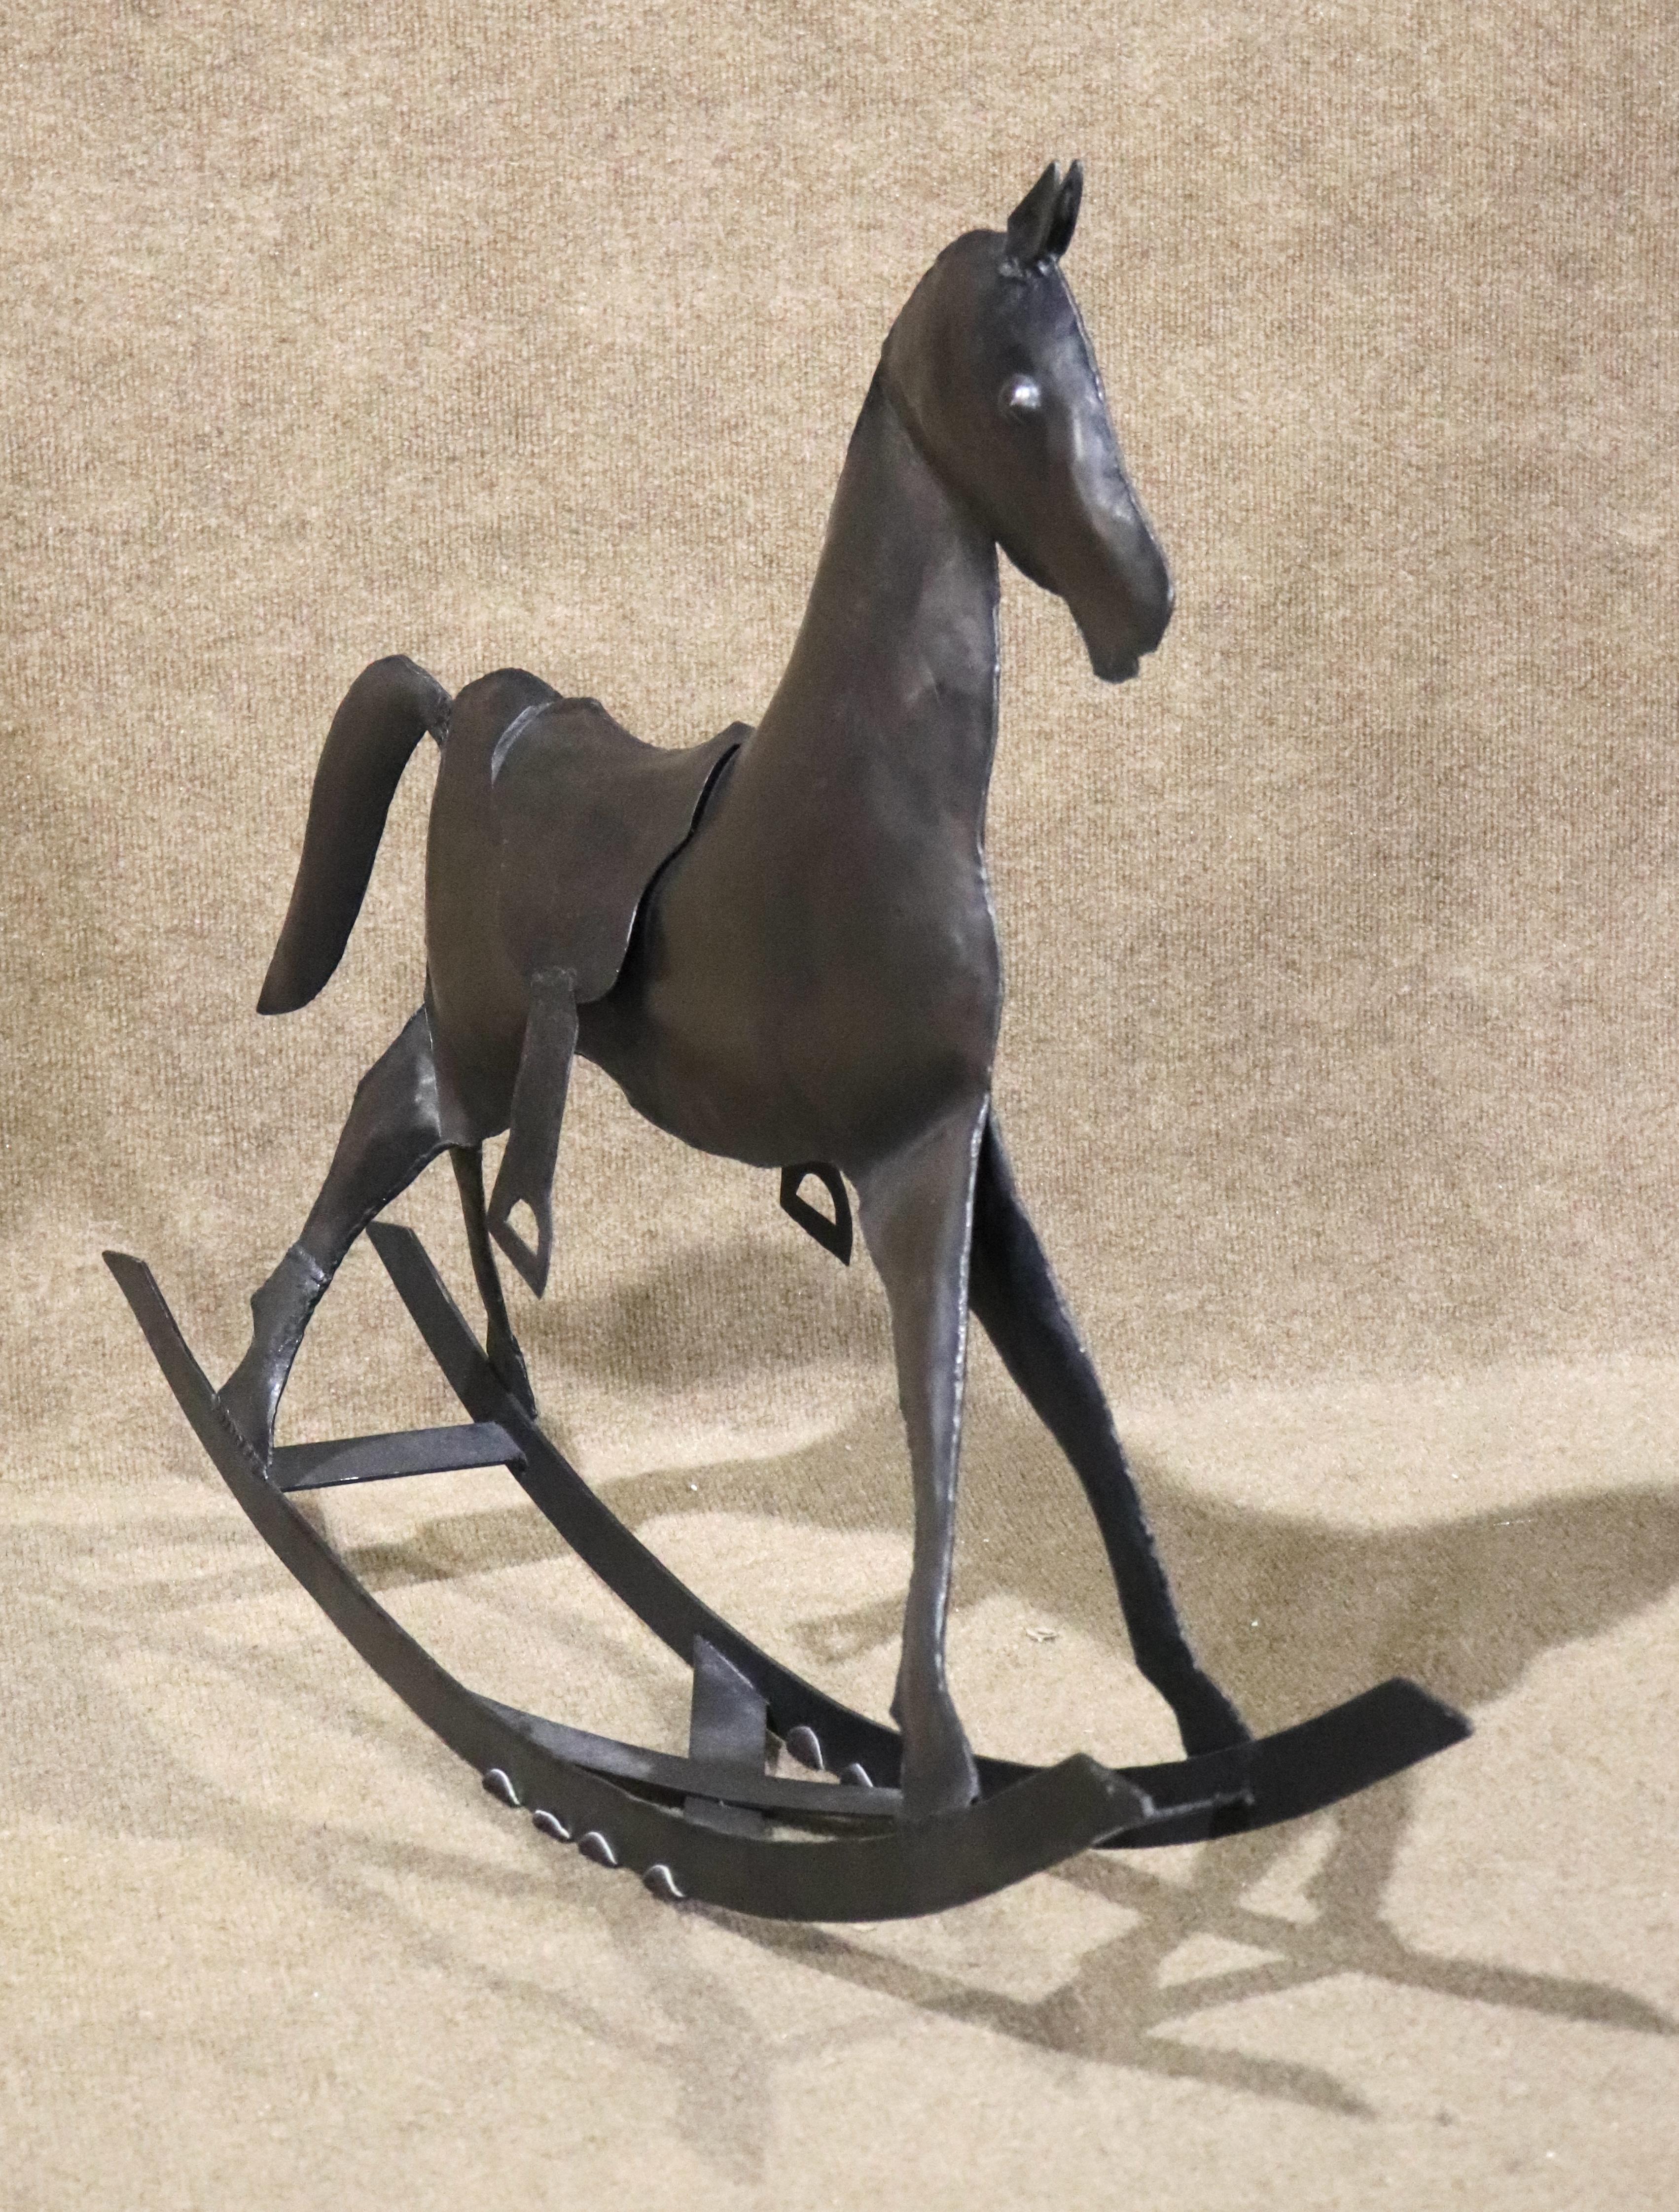 This fun handmade rocking horse is made fully of sheets of metal, welded to create a child's horse.
Please confirm location NY or NJ